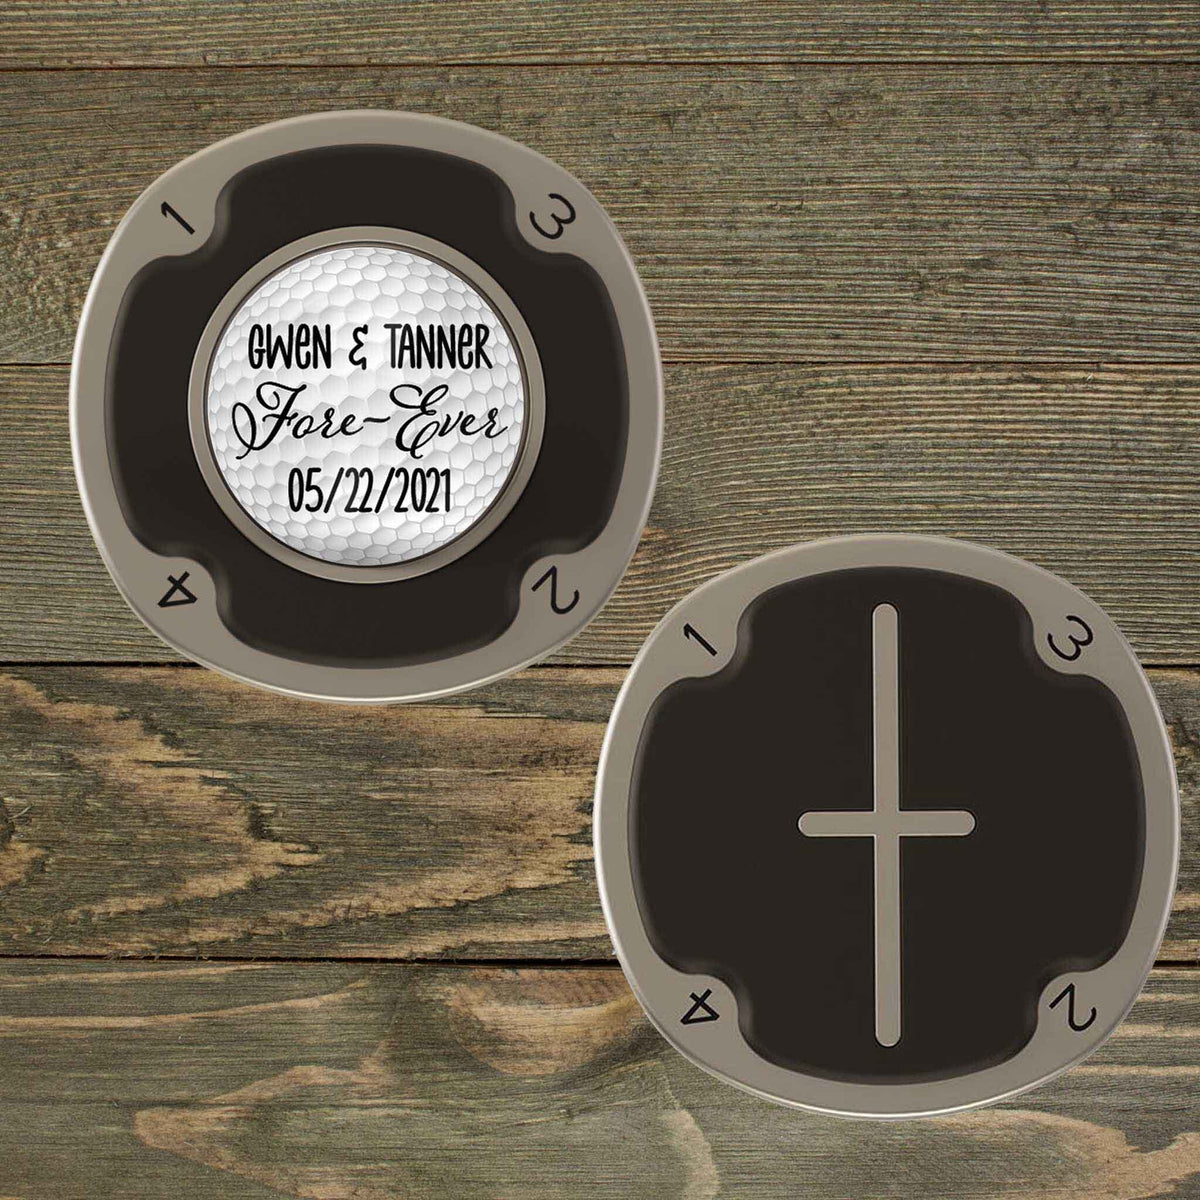 Personalized PitchFix MultiMarker Tool | Custom Ball Markers | Golf Gifts | Fore-Ever